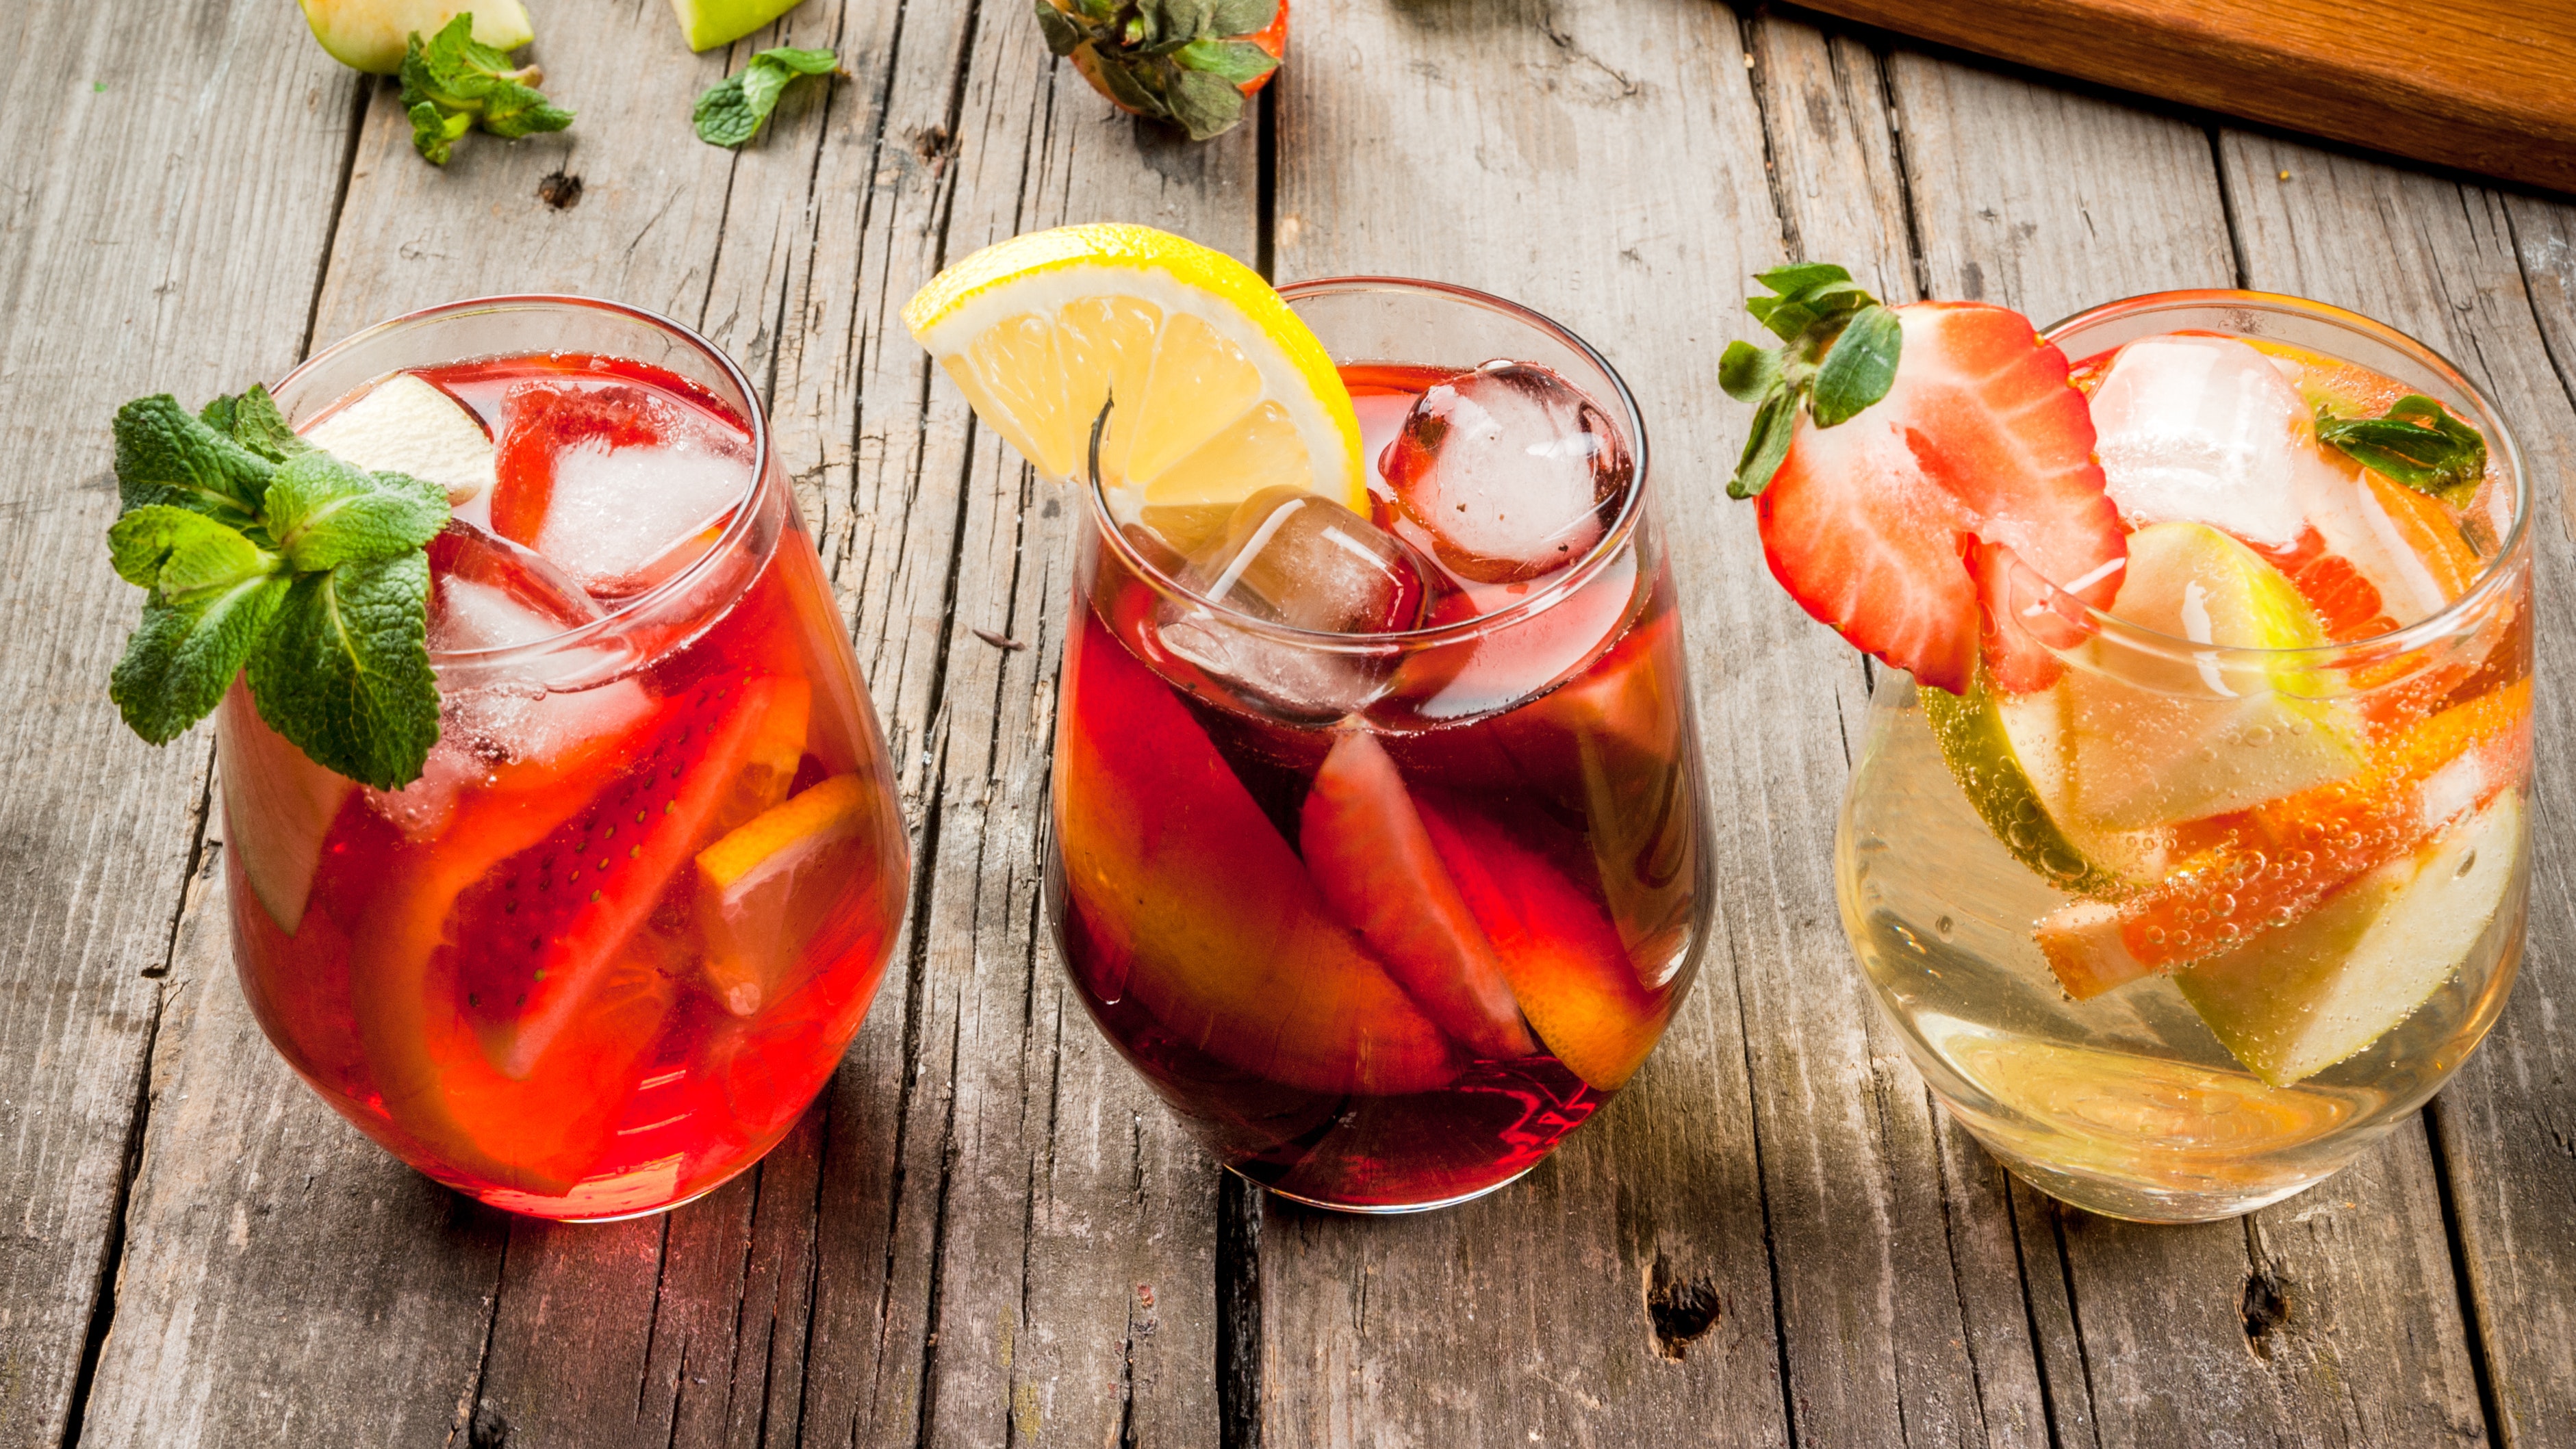 5-unusual-non-alcoholic-summer-drinks-you-can-easily-make-at-home-136427927233902601-180621074029.jpg